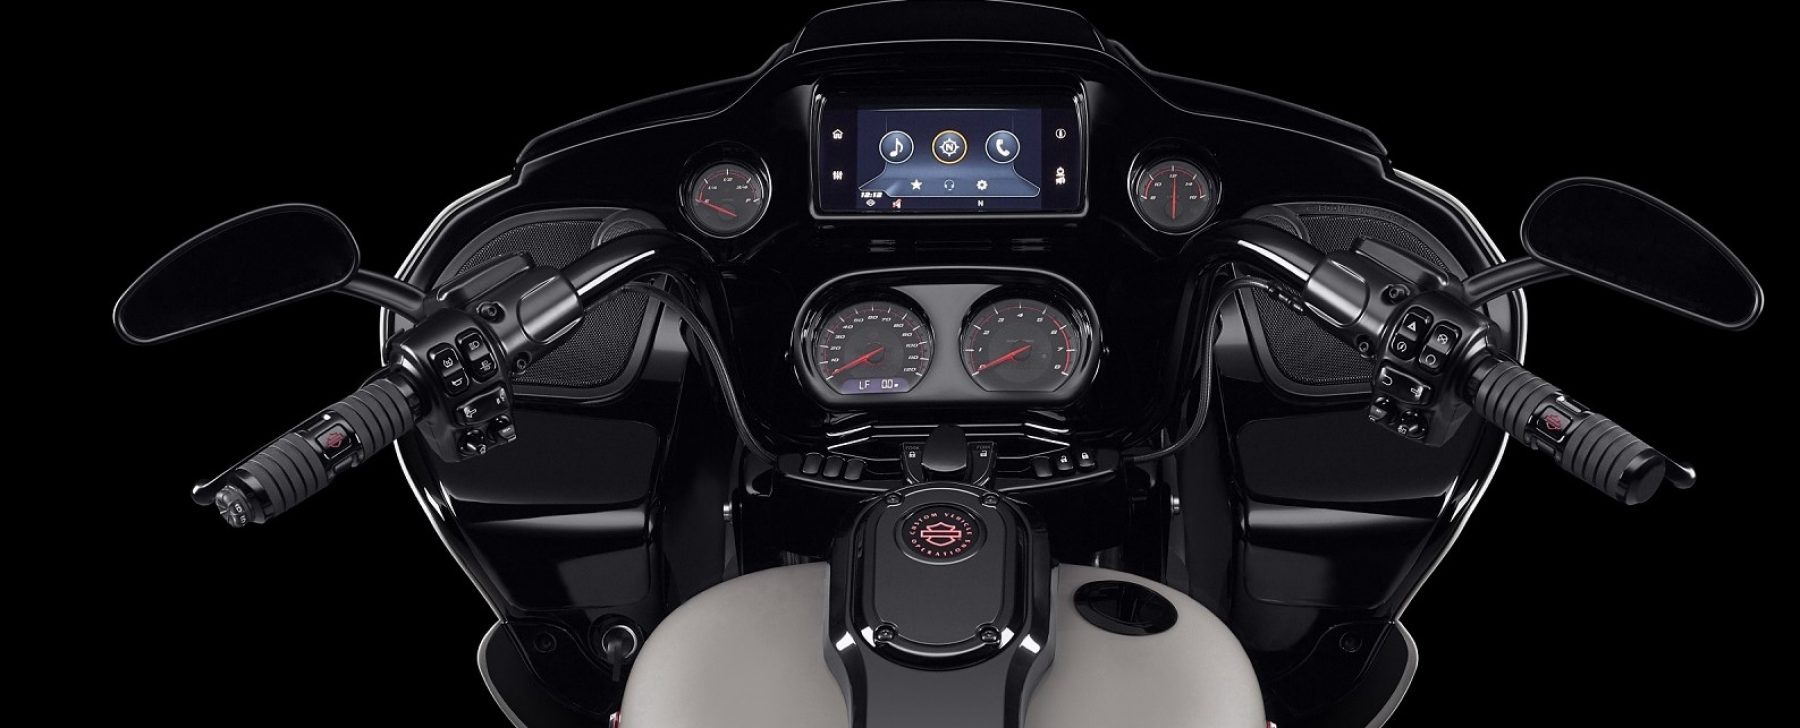 Harley Android Auto